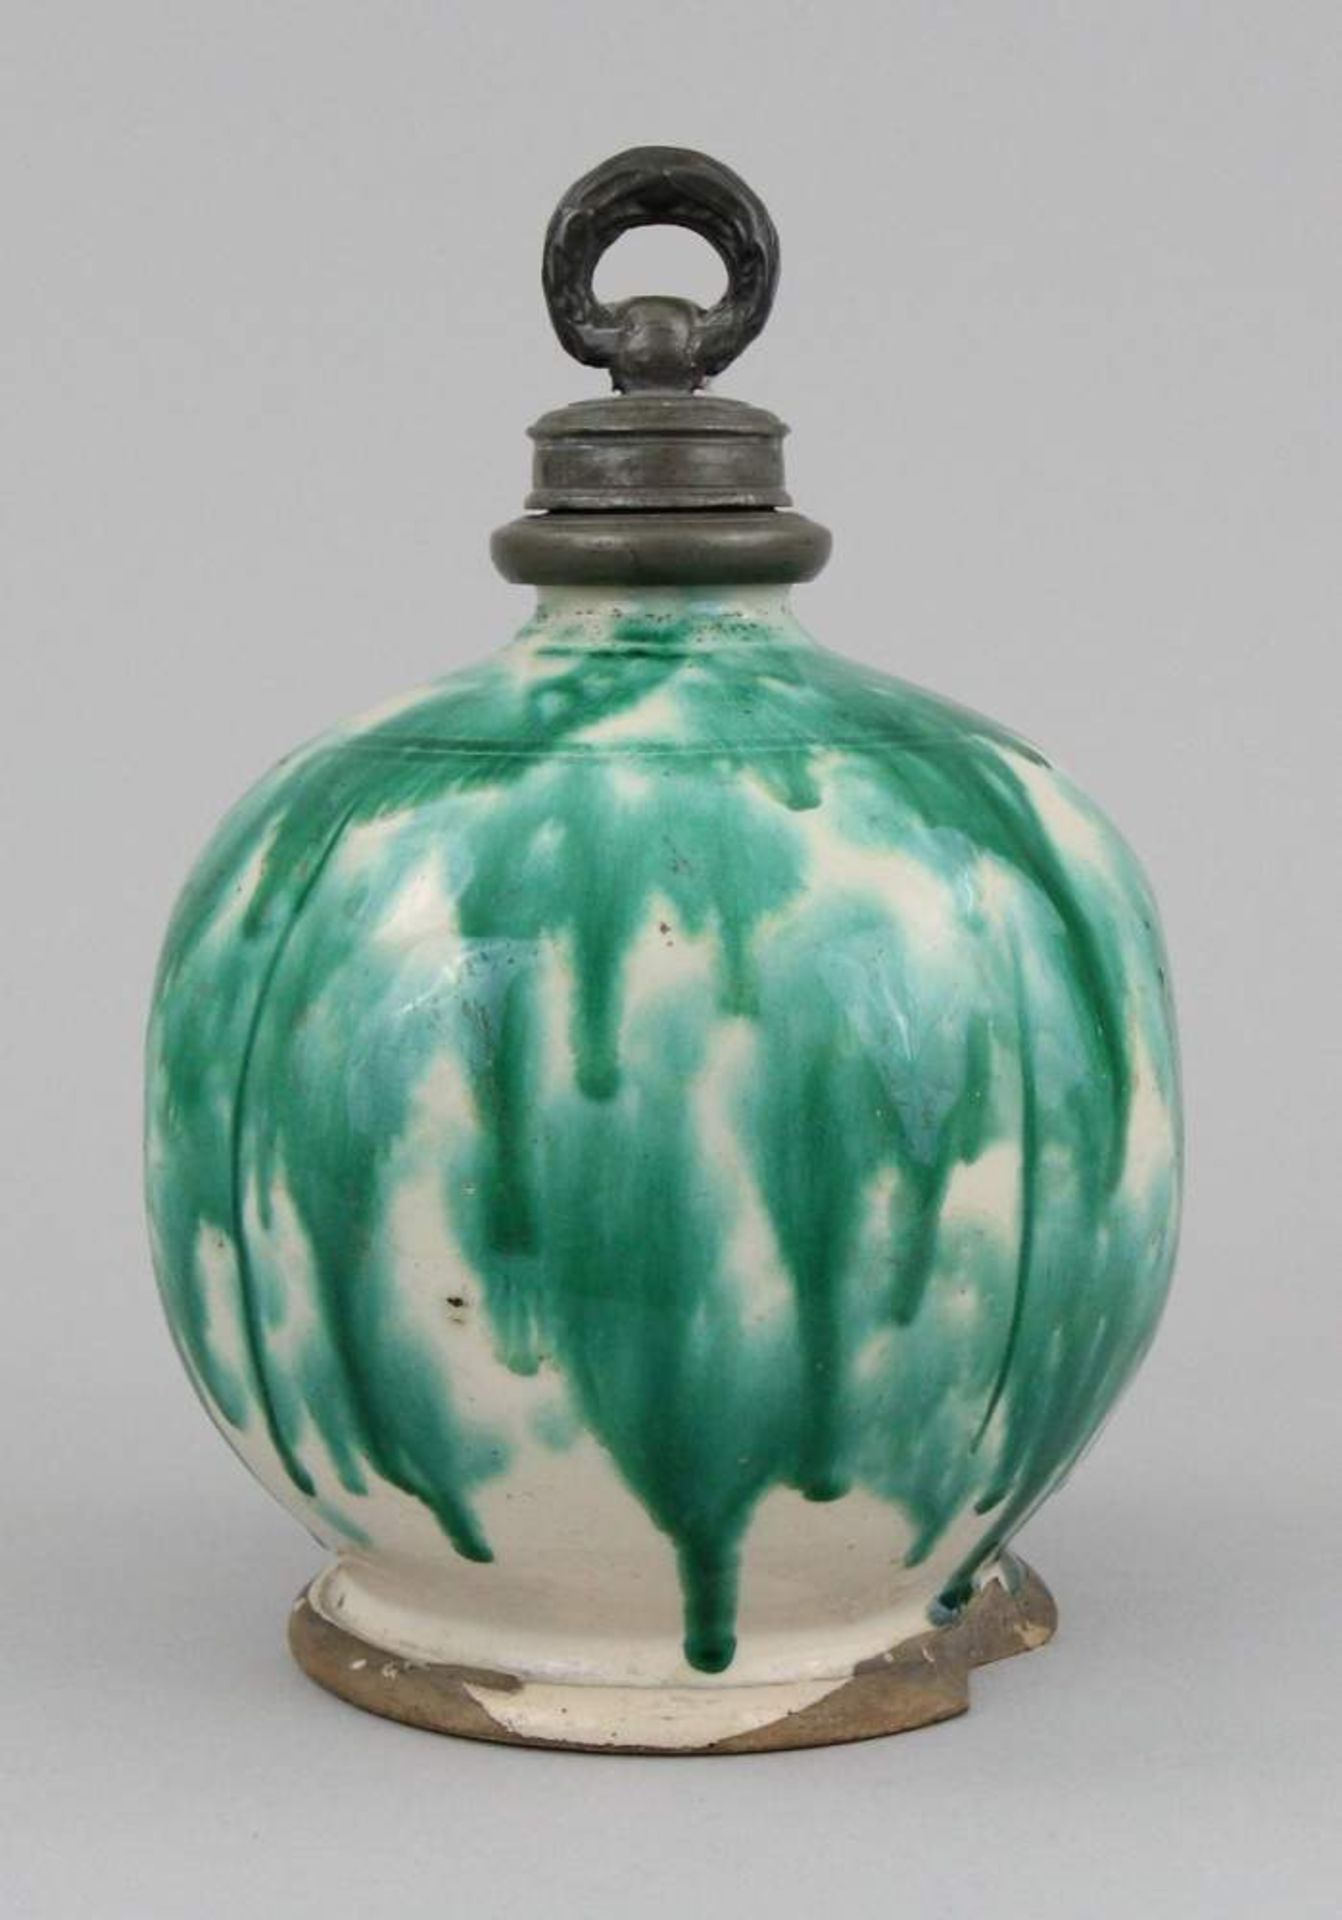 Bottle Green coloured faience, pewter mounting, h. 20.5 cm, Gmunden Austria c.1800, chip to the - Image 2 of 4